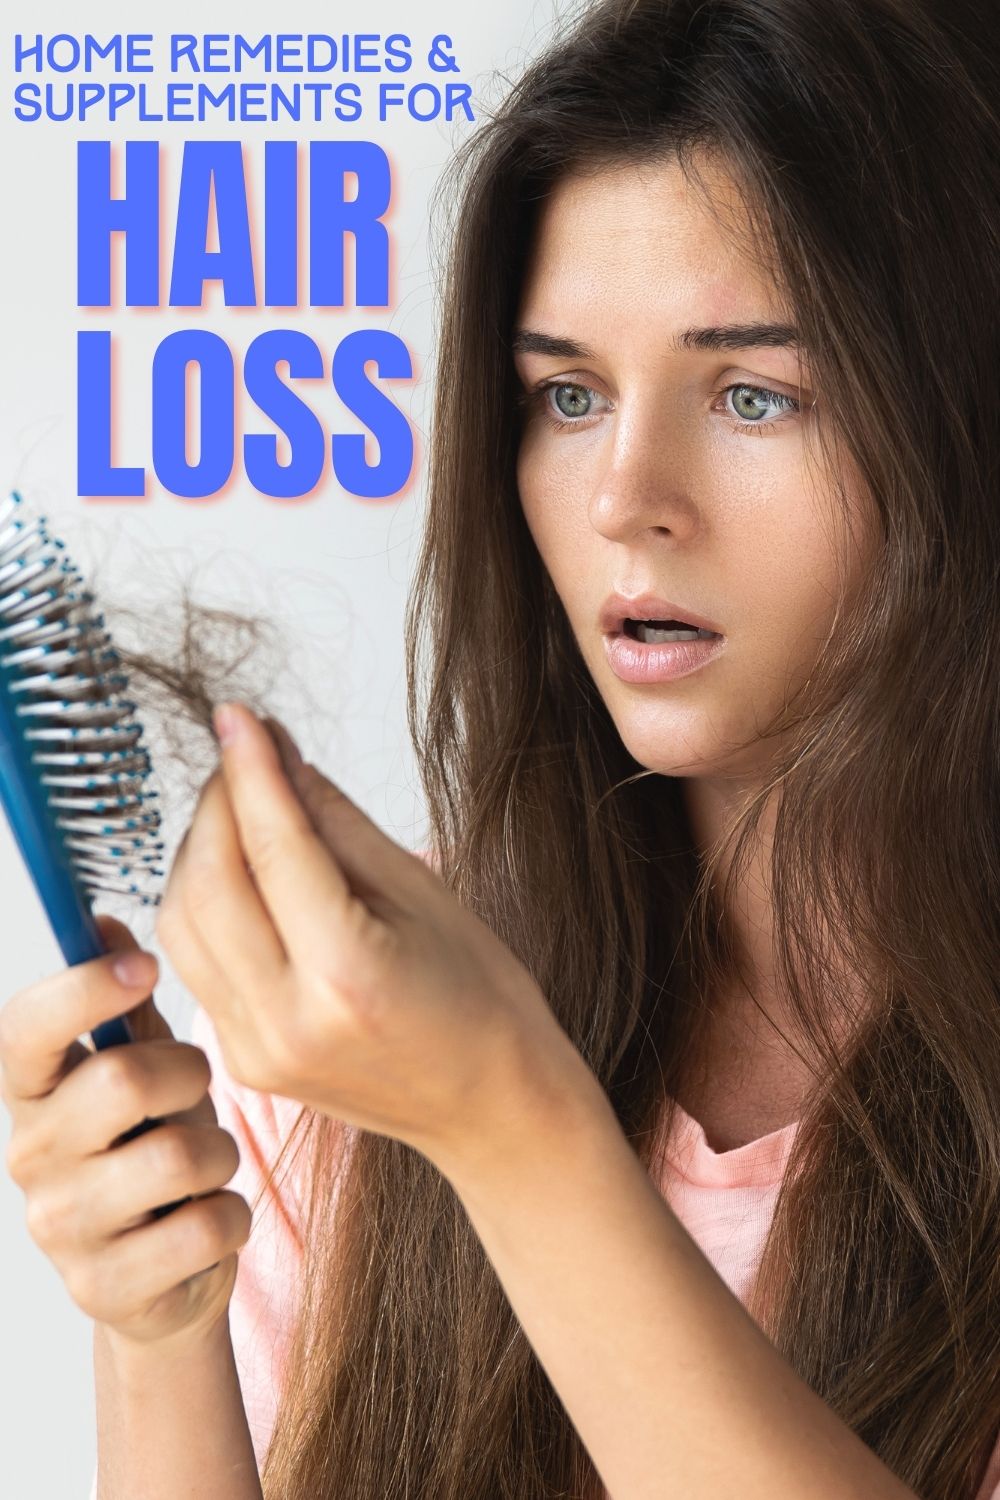 12 Home Remedies And Supplements For Hair Loss